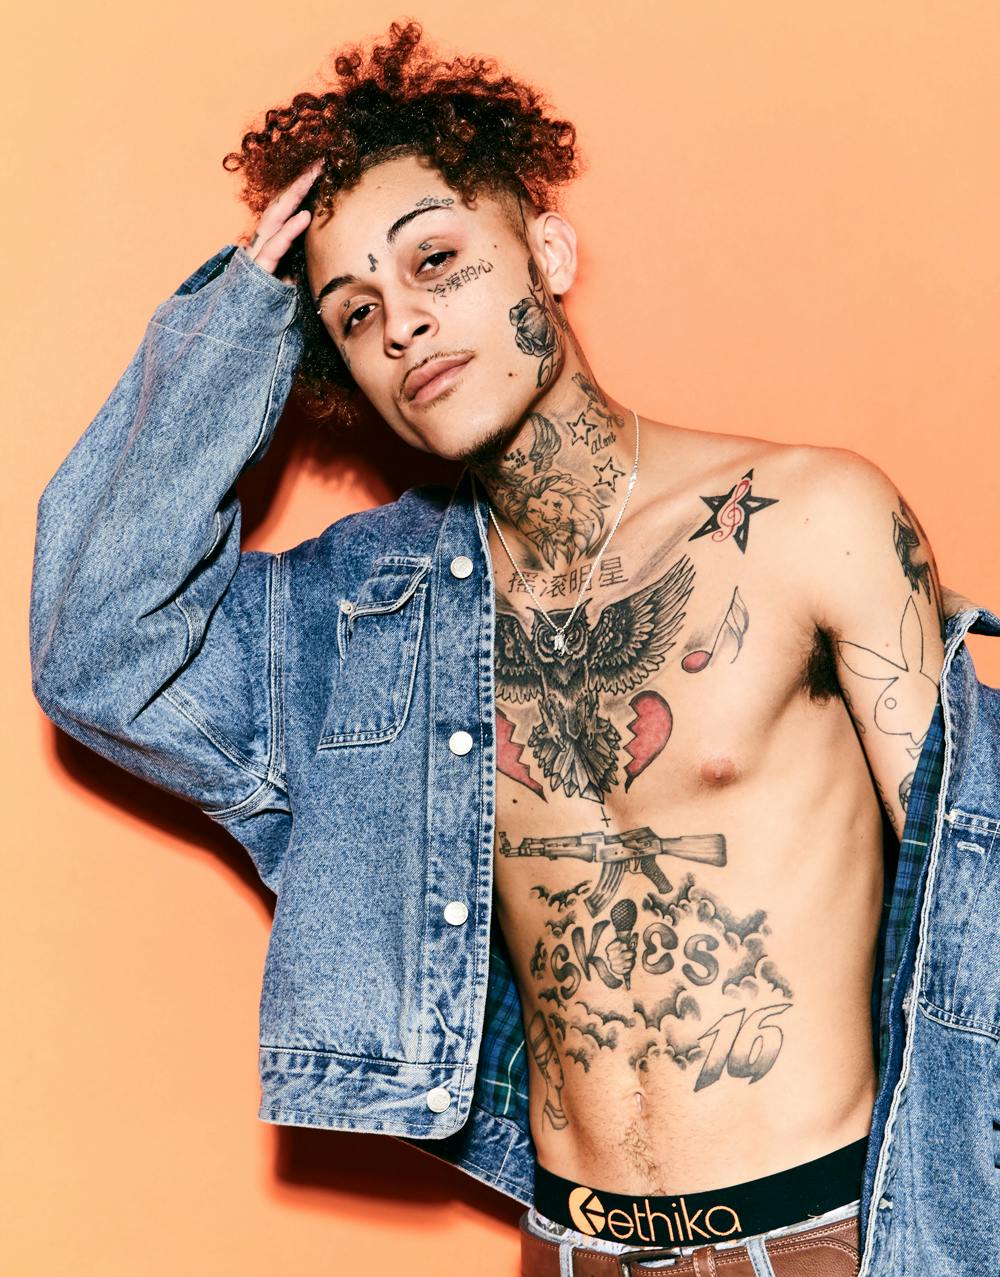 Lil Skies3 These are the states most likely to legalize at the polls in 2018